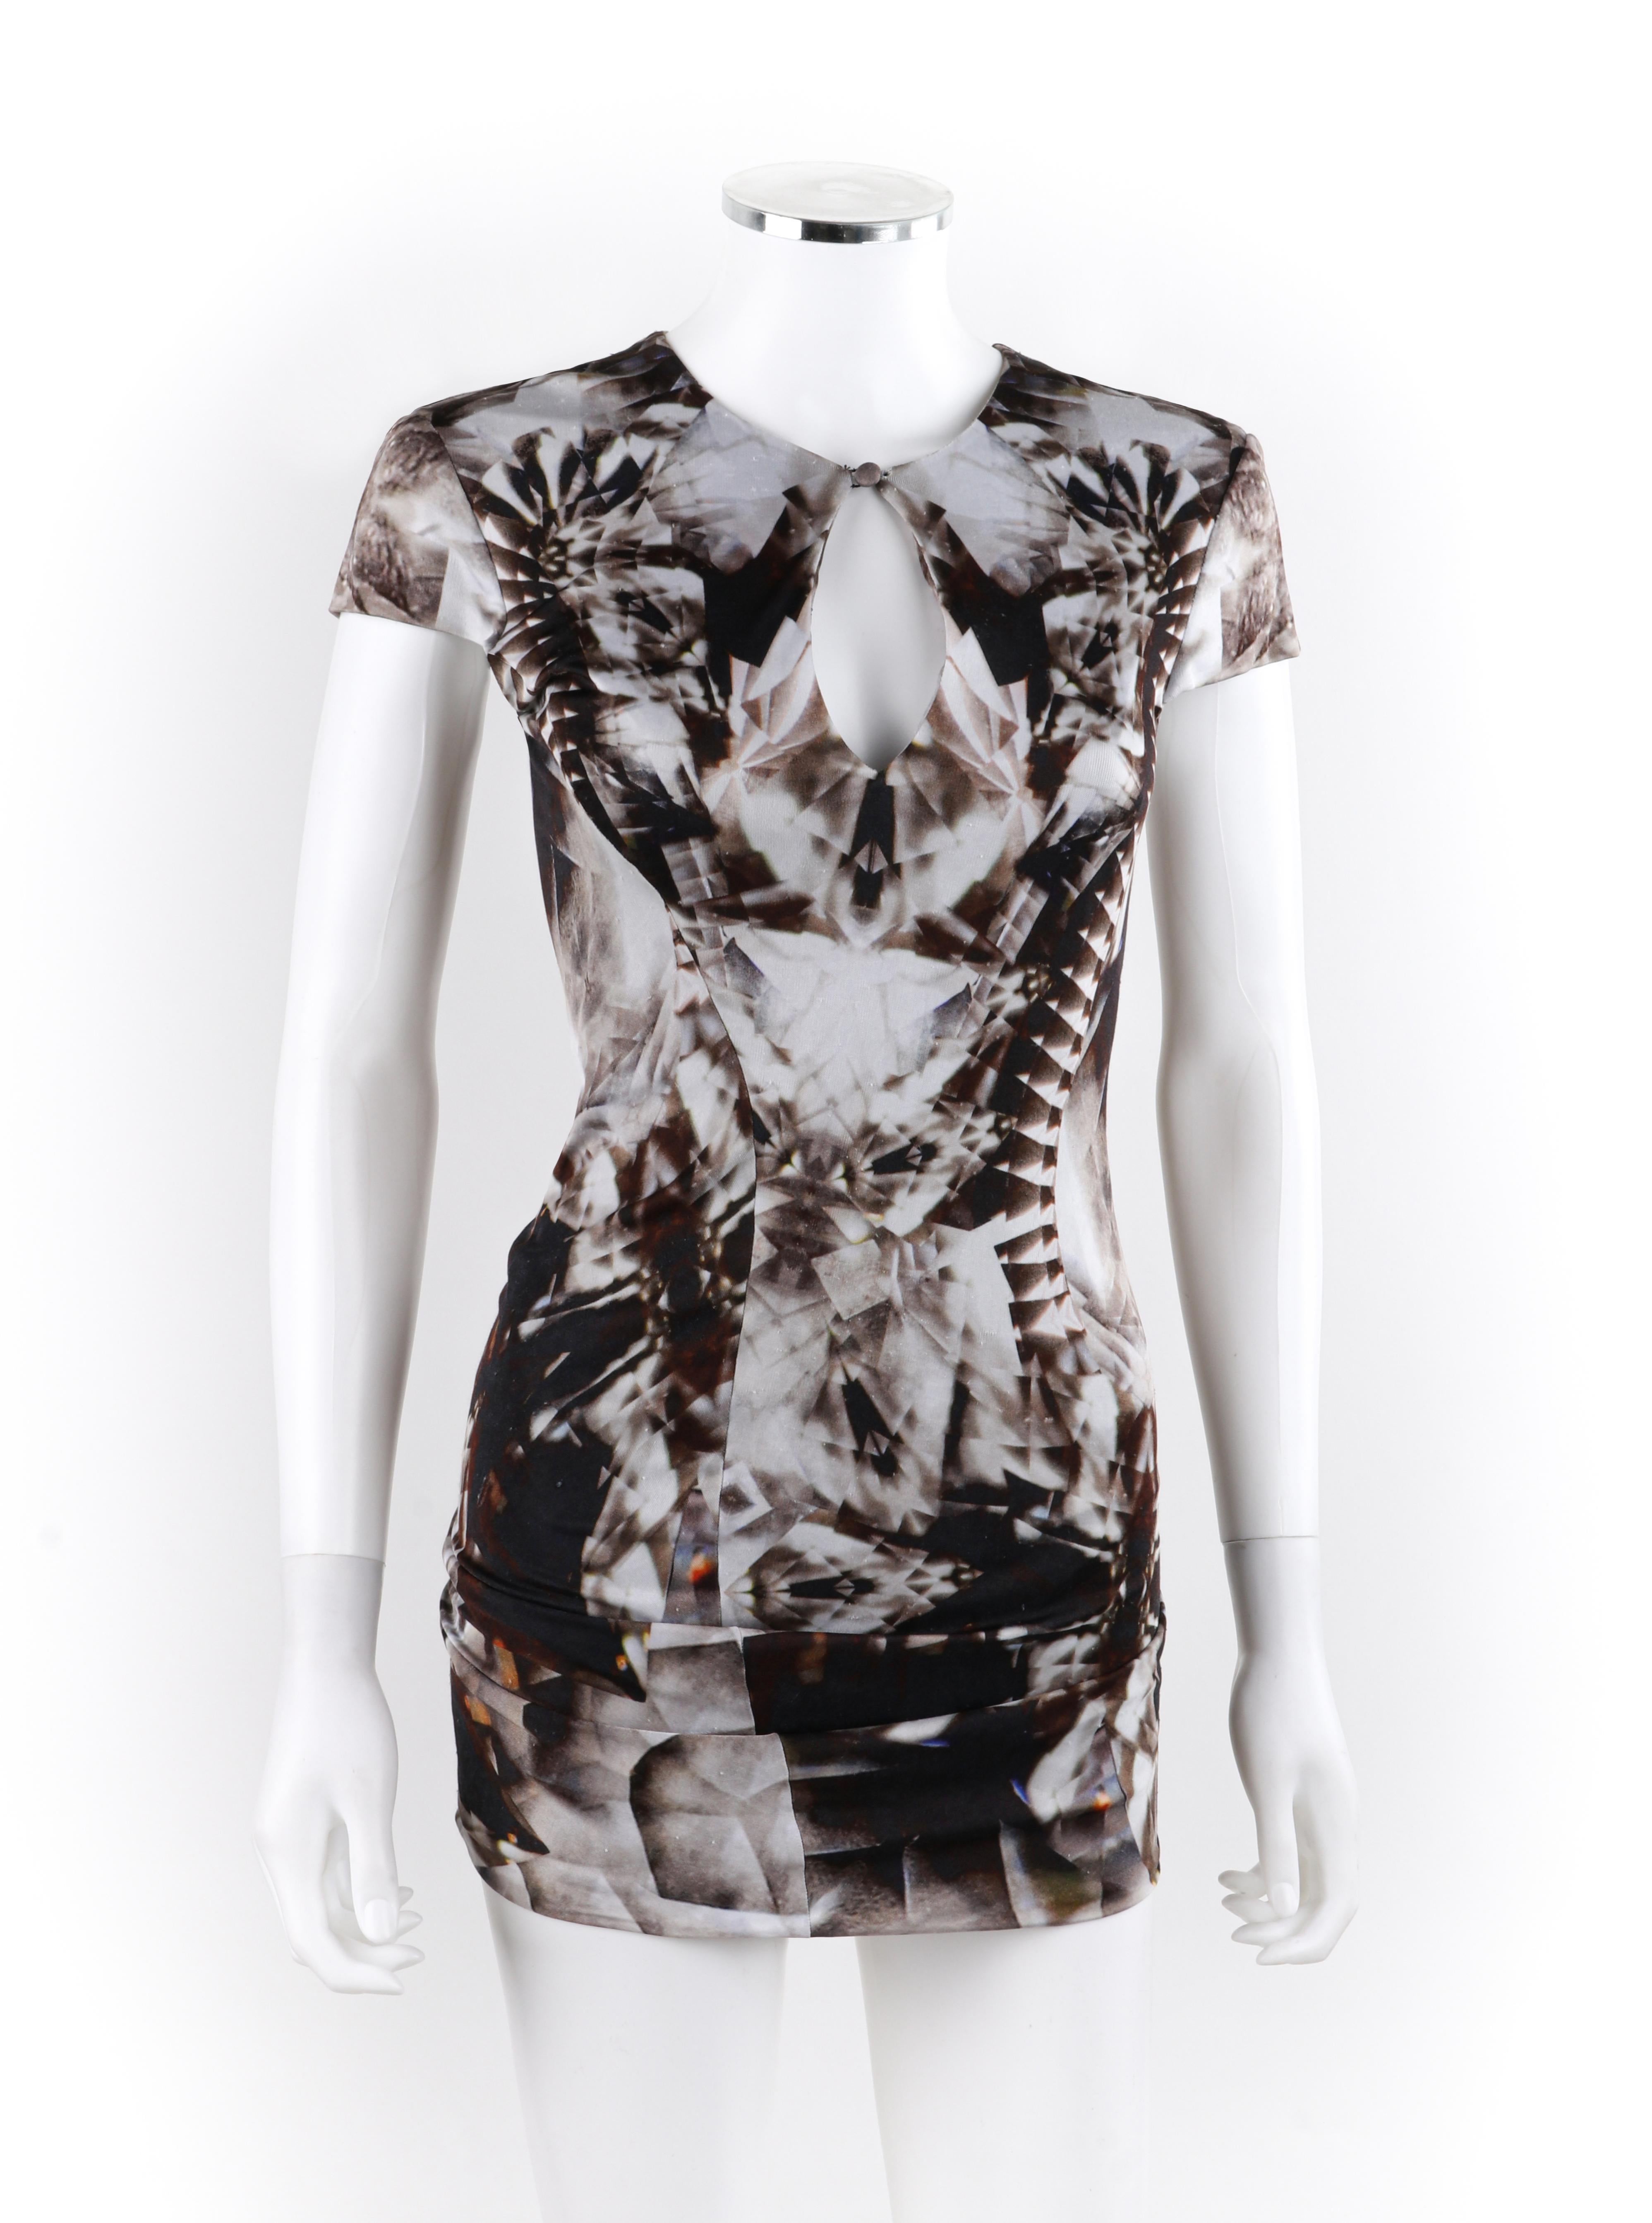 ALEXANDER McQUEEN S/S 2009 Black White Skeleton Kaleidoscope Twisted Draped Top In Fair Condition For Sale In Thiensville, WI